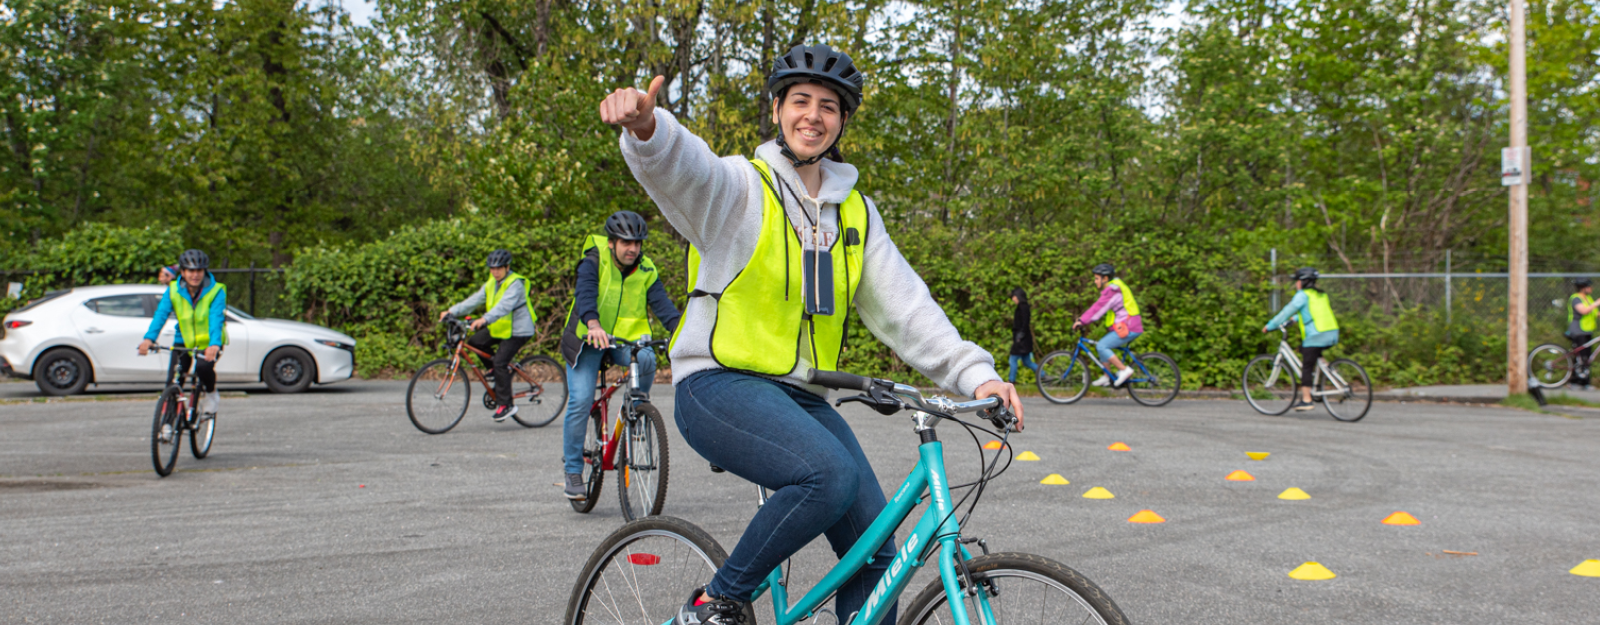 A South Asian adult woman in her 20s rides her bike around a parking lot. She looks at the camera and holds up her thumb in approval. She is smiling. Several other adult students are riding their bikes behind her.